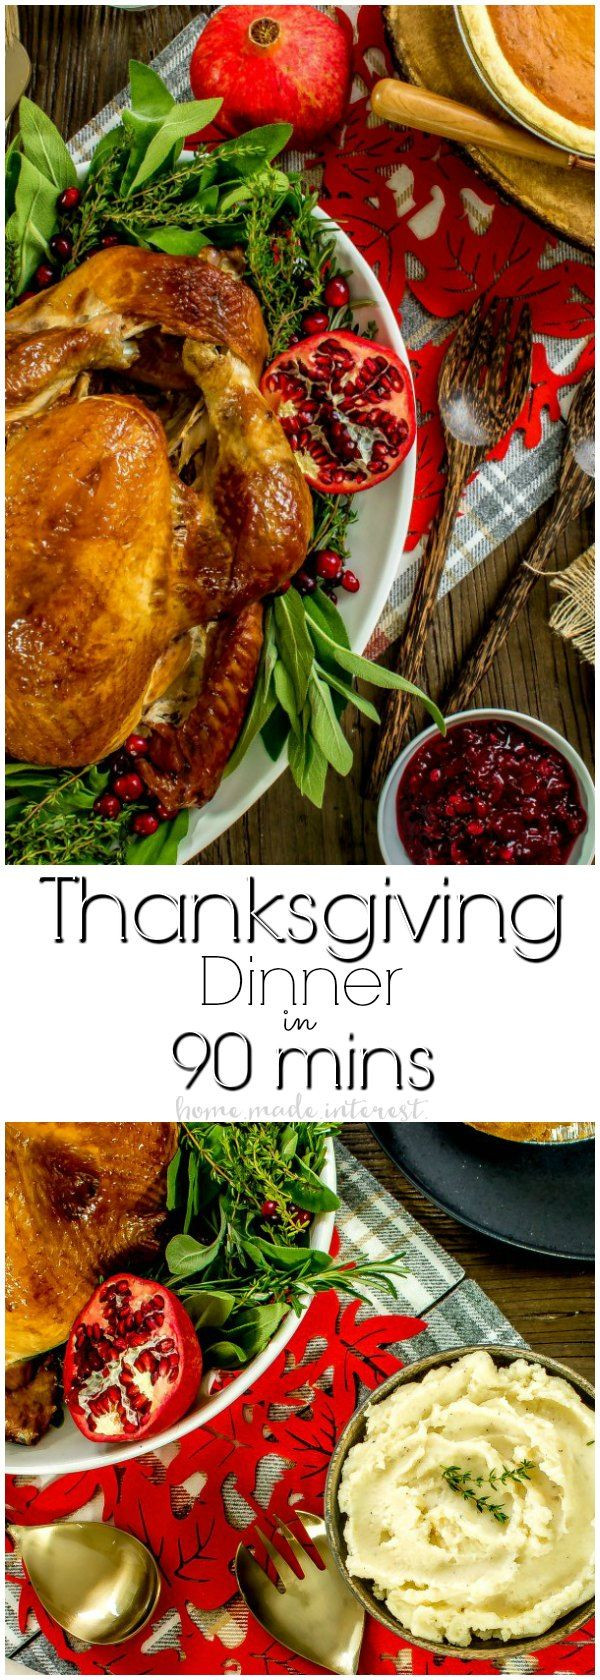 Delivered Thanksgiving Dinners
 348 best Thanksgiving images on Pinterest